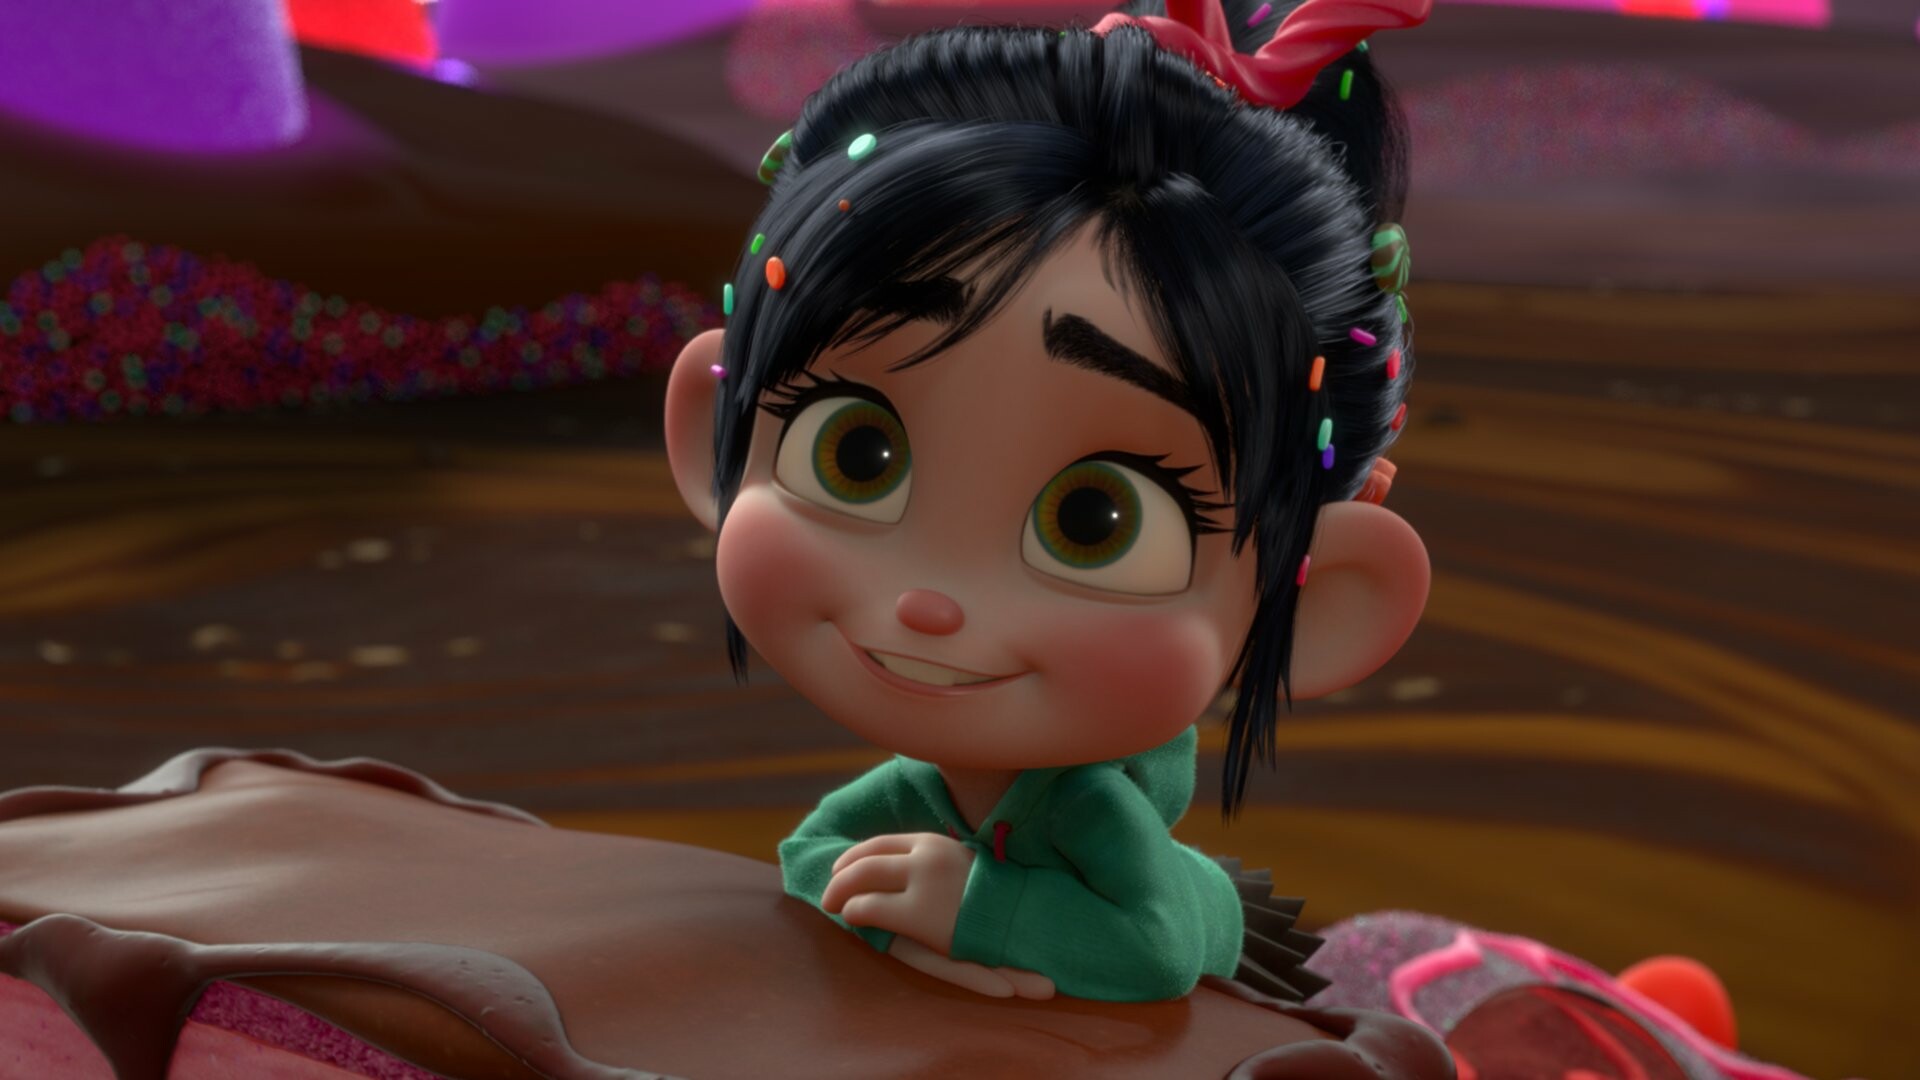 Wreck-It Ralph: She served as the kingdom's princess and top racer in the Sugar Rush game. 1920x1080 Full HD Background.